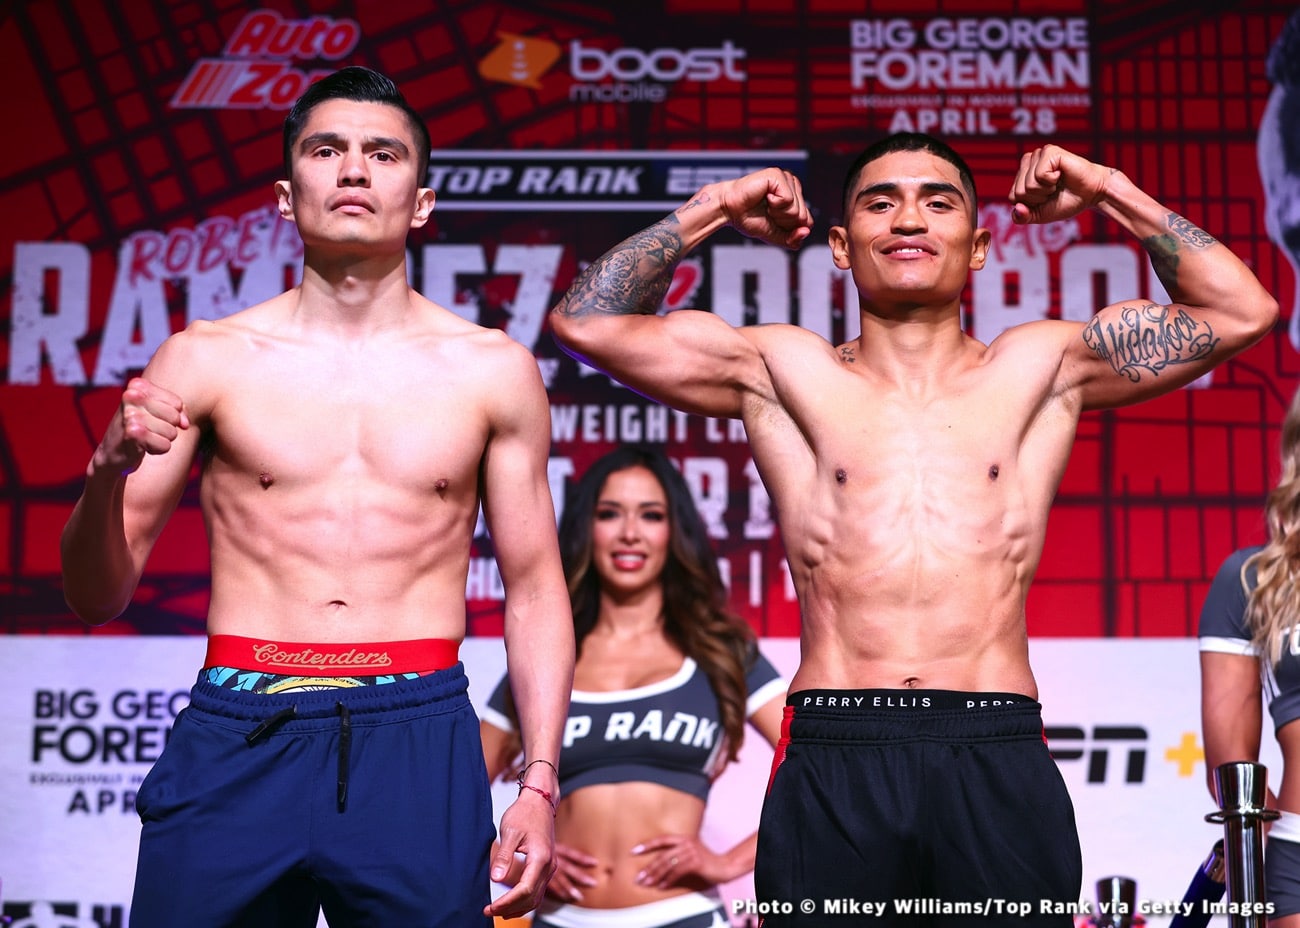 Image: Robeisy Ramirez 125.6 vs. Isaac Dogboe 124.6 - weigh-in results for Saturday on ESPN+